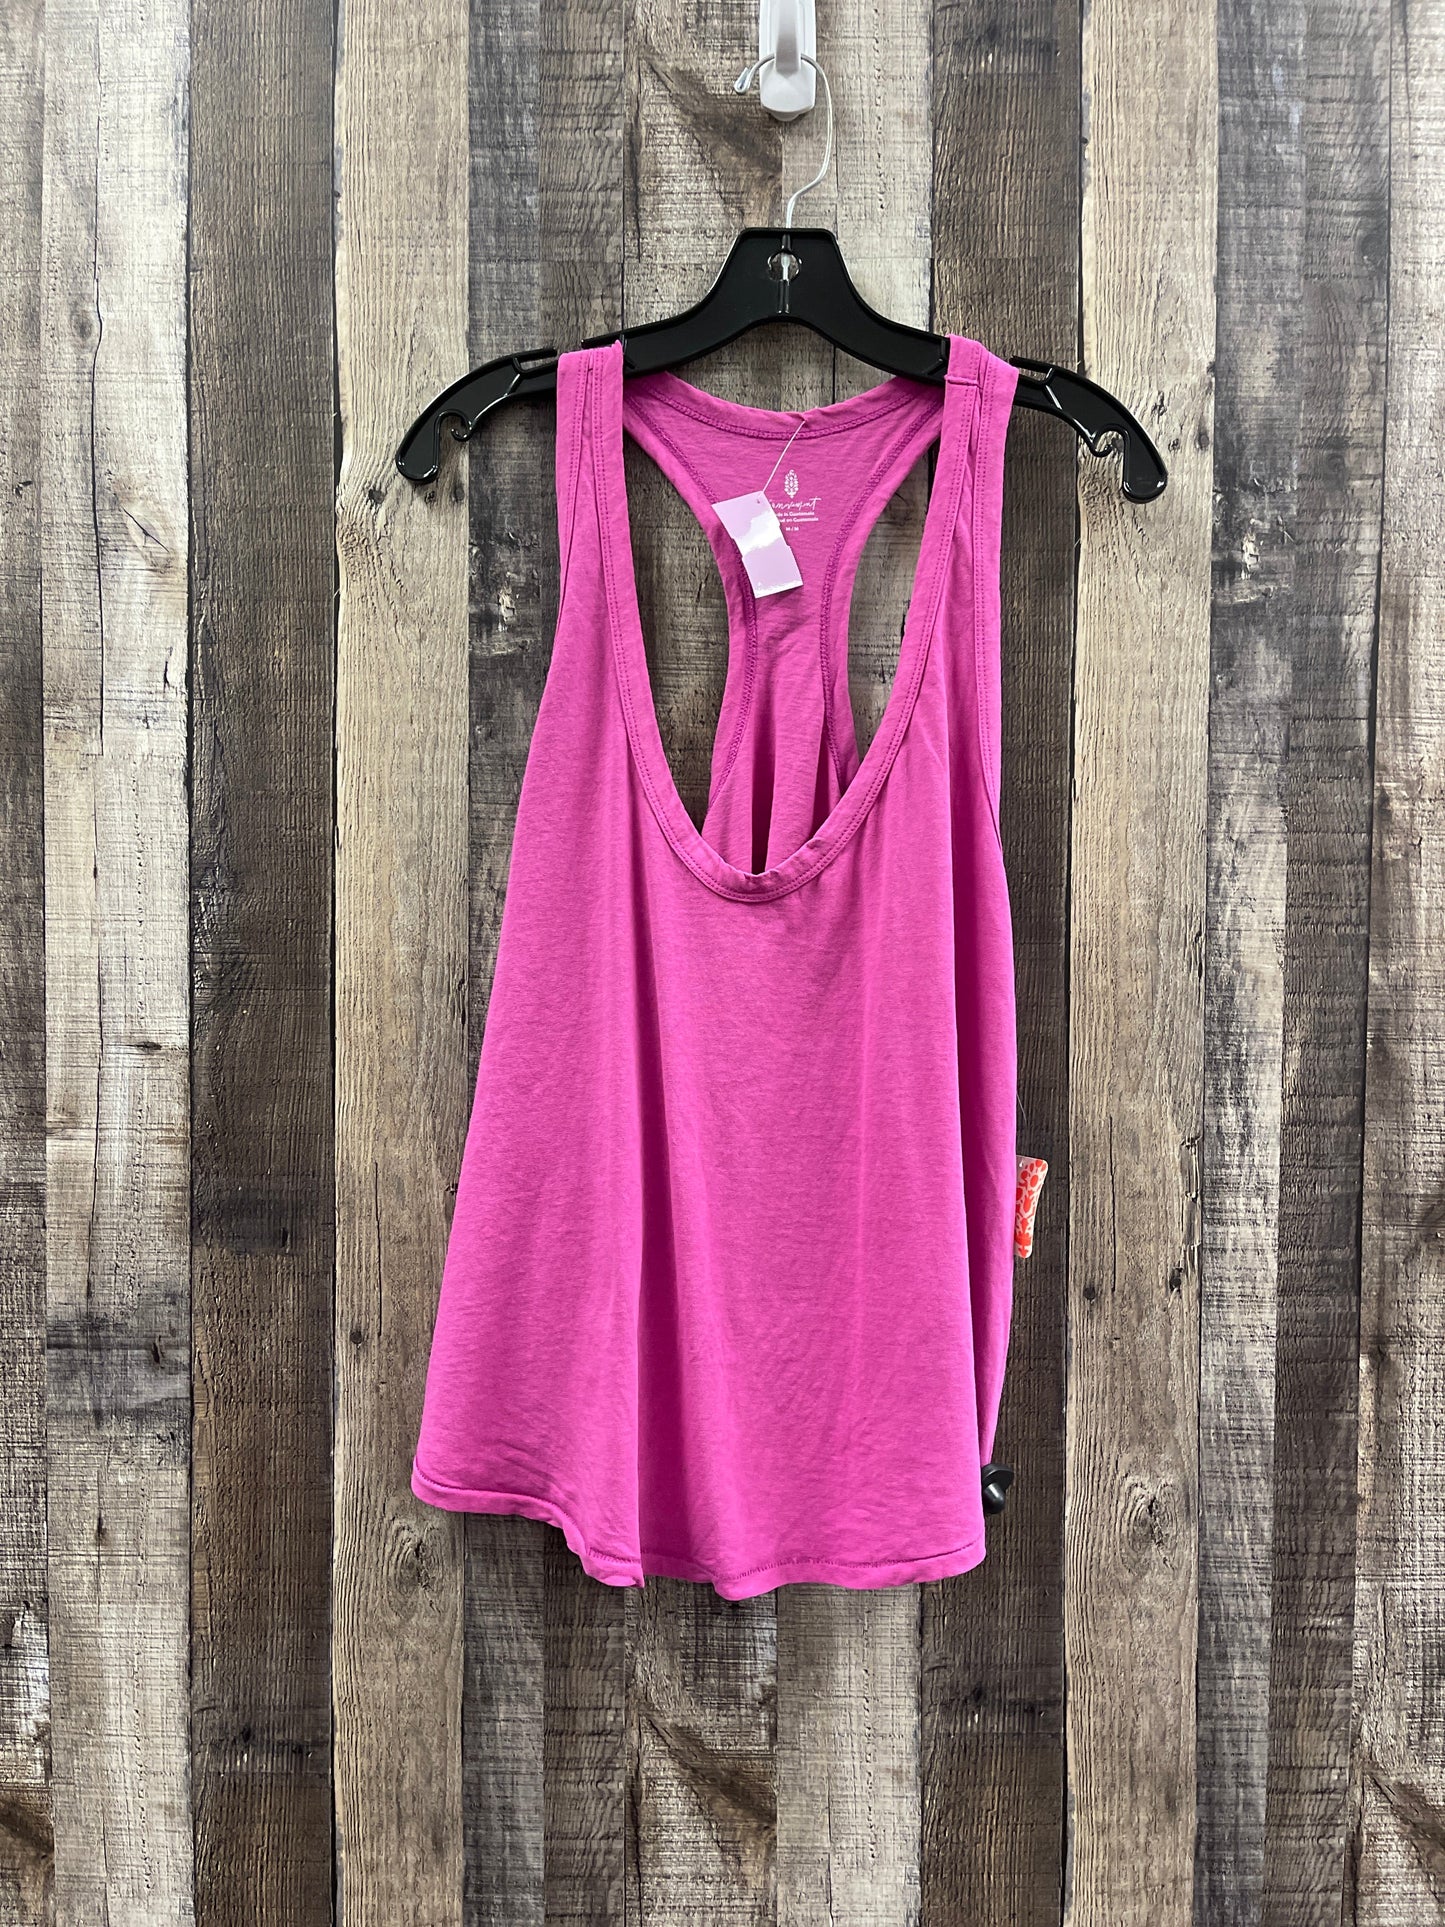 Pink Athletic Tank Top Free People, Size M